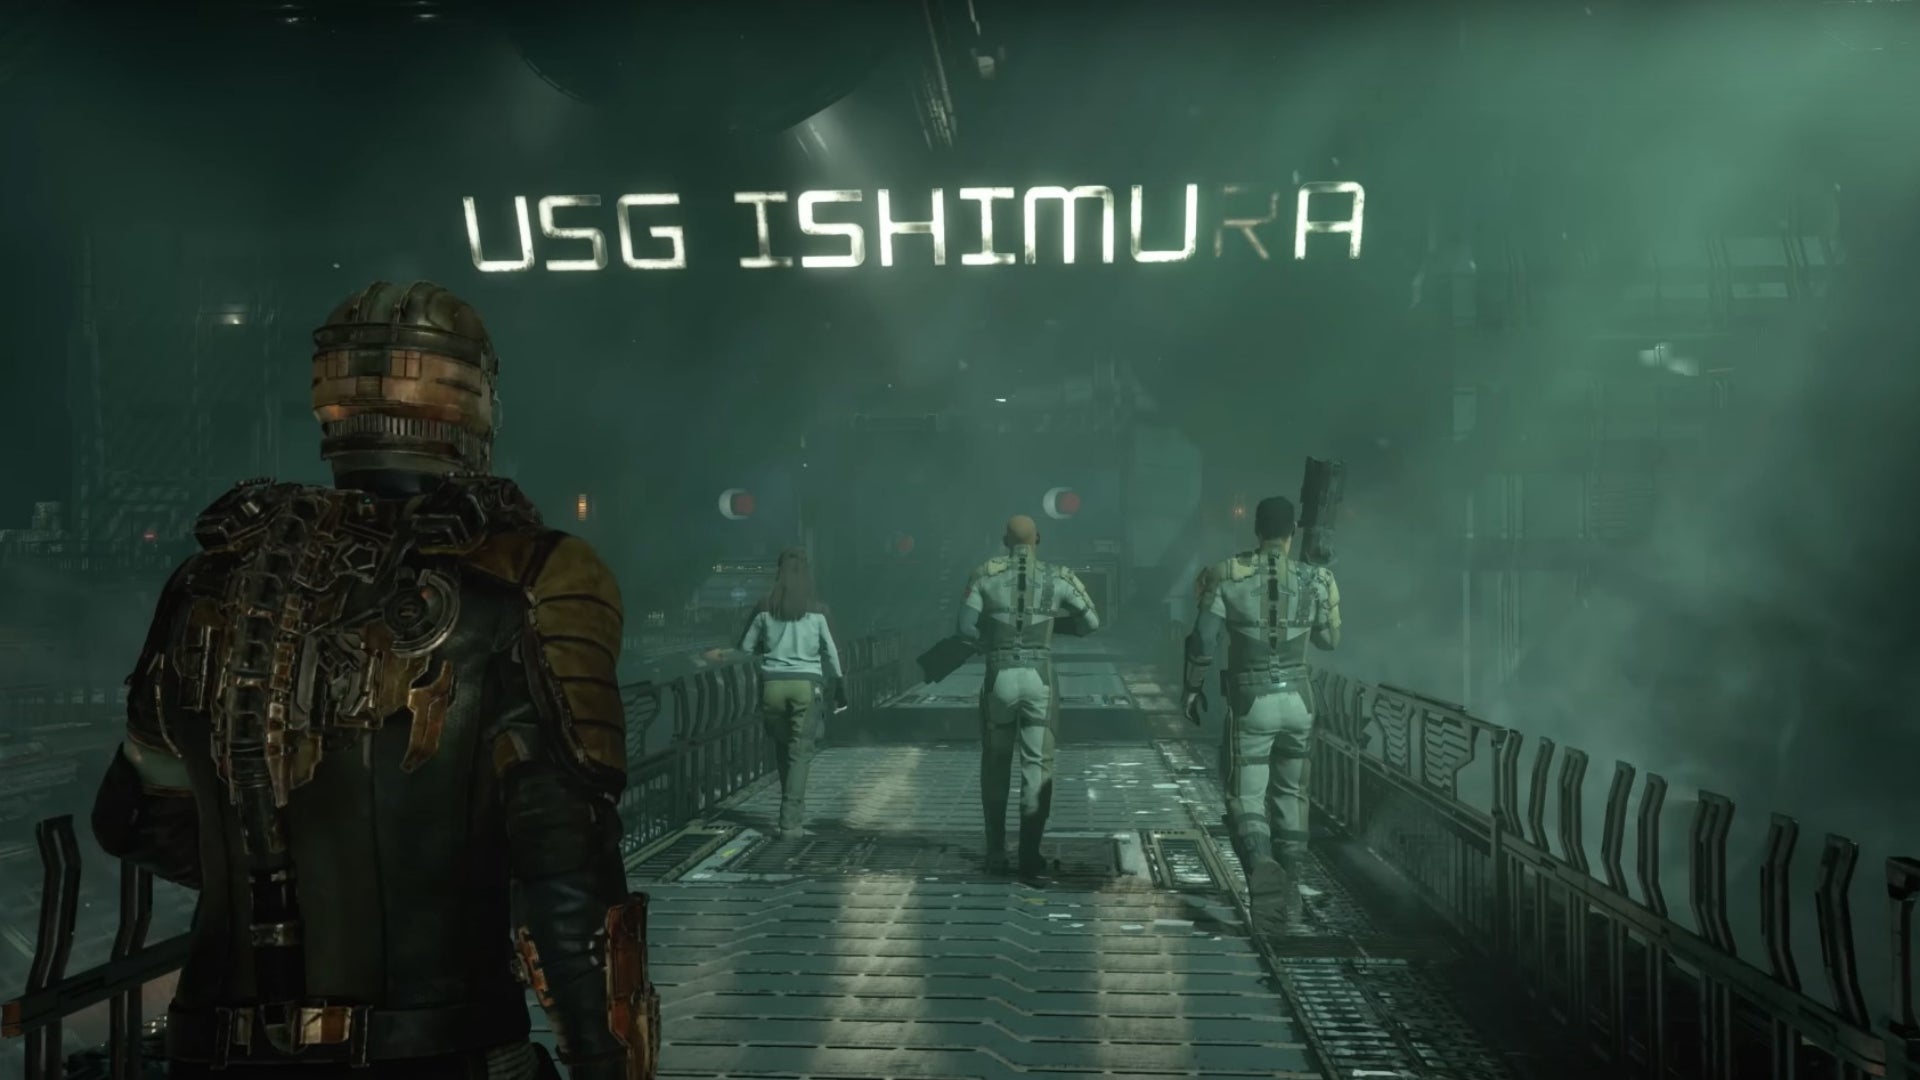 Isaac Clarke approaches the USG Ishimura in the launch trailer for the Dead Space Remake